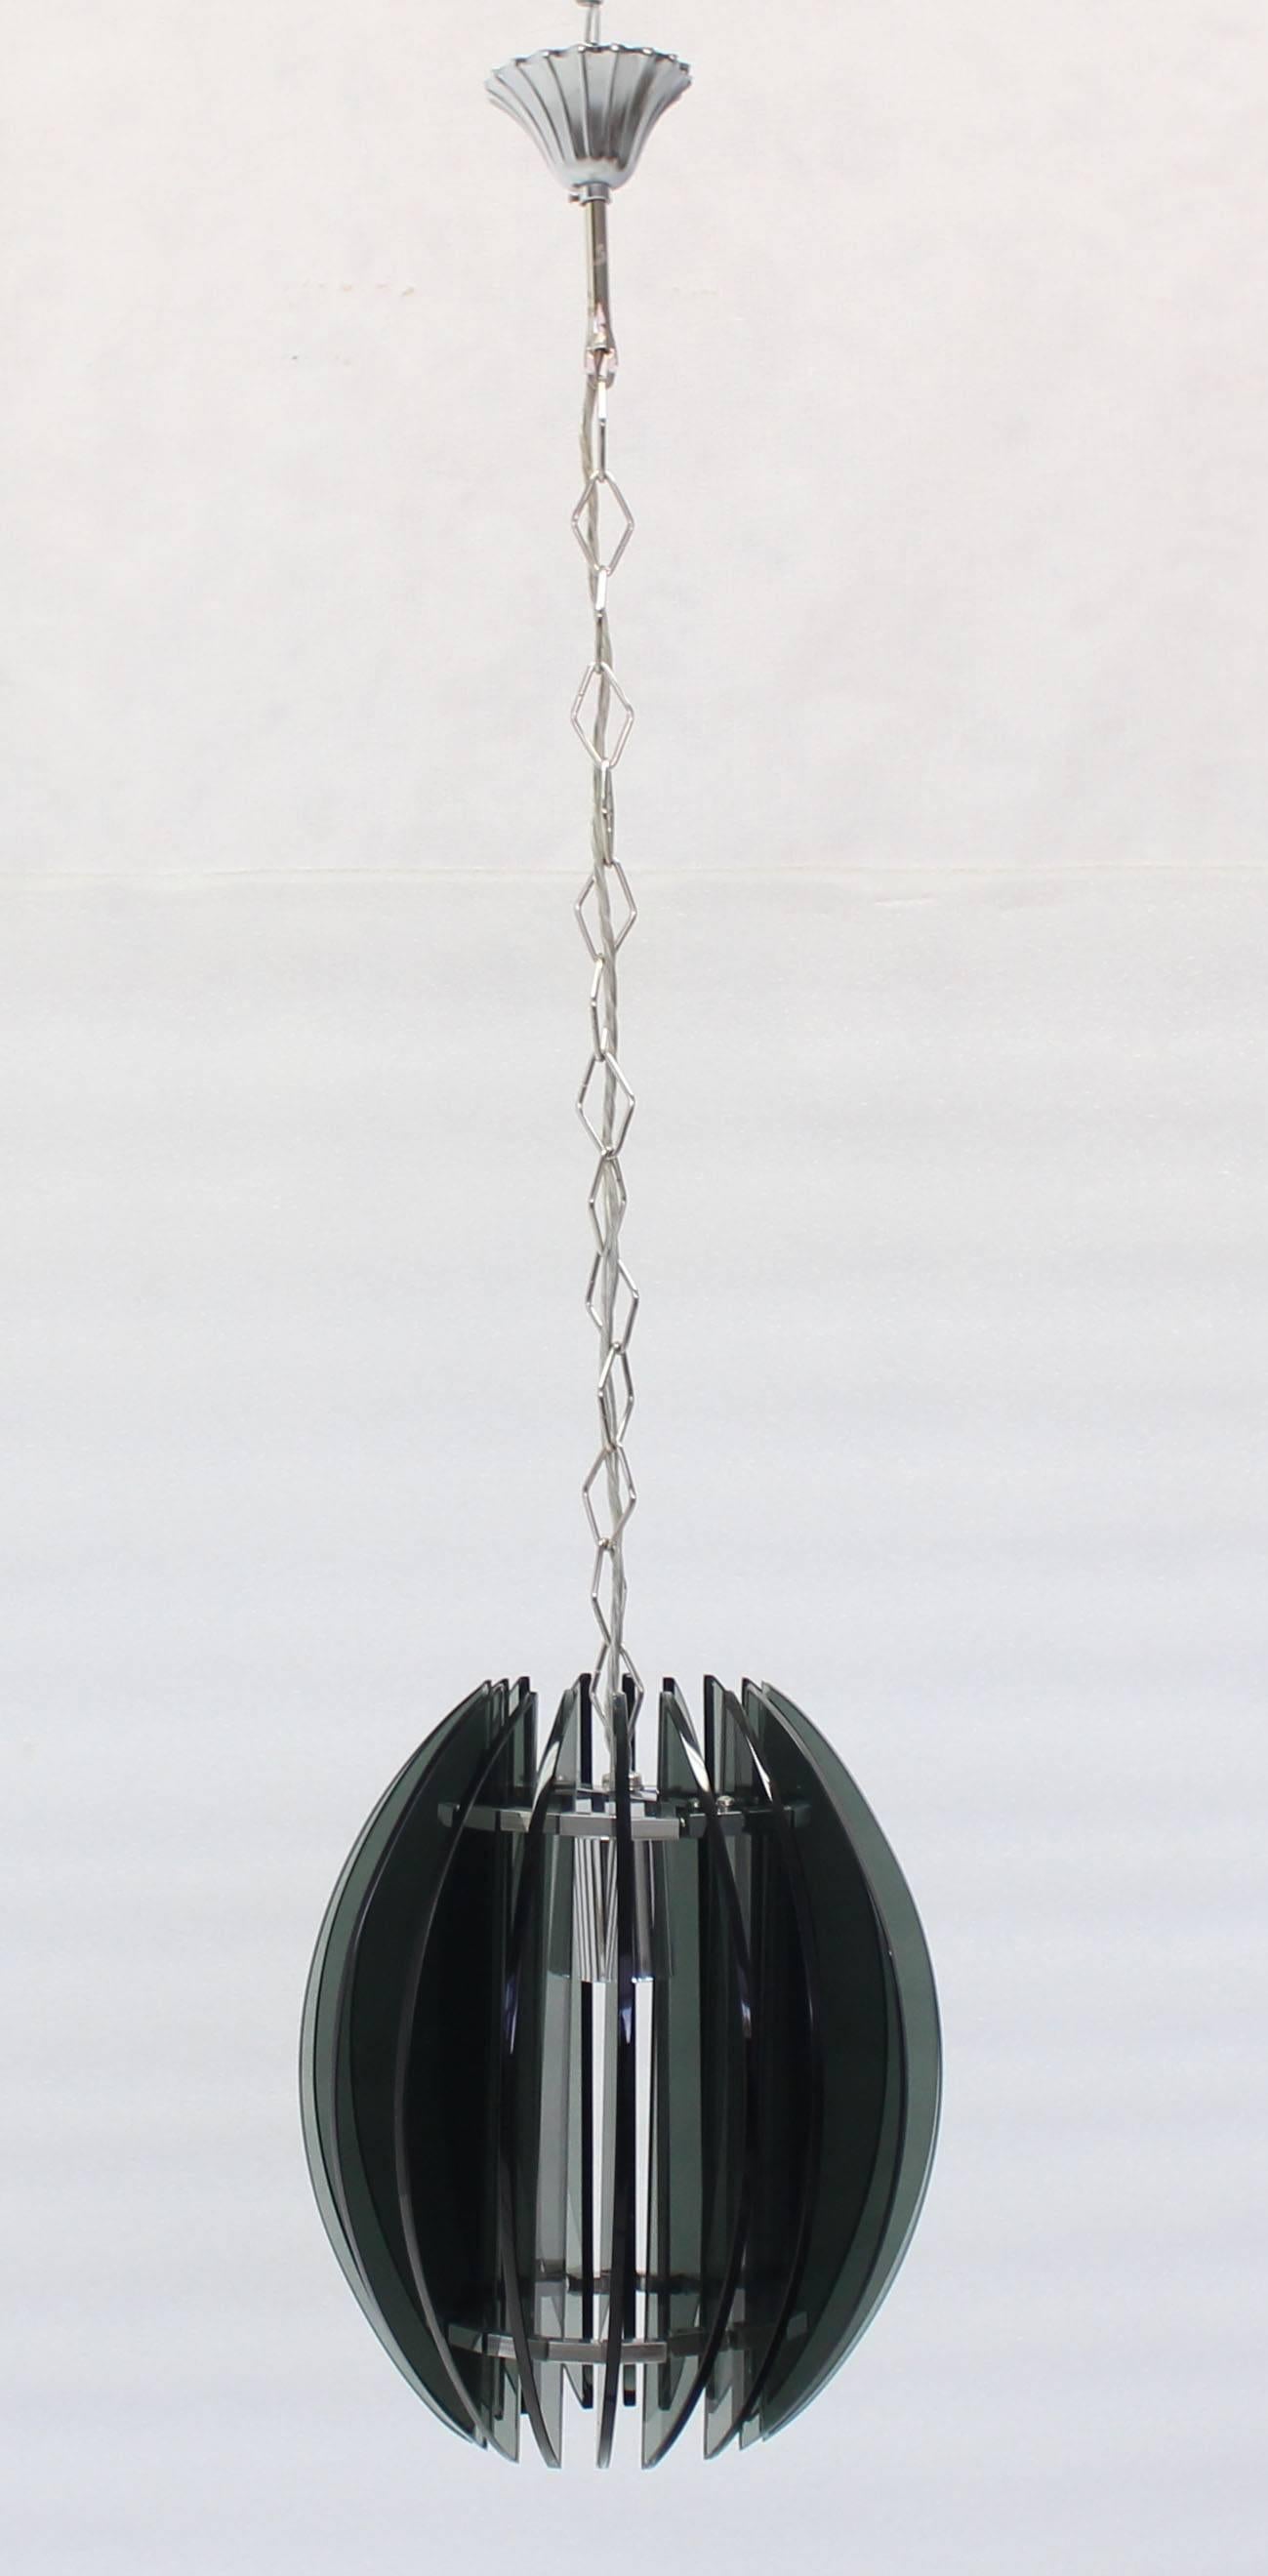 Hi quality smoked glass Italian Mid-Century Modern pendant light fixture chandelier. The actual pendant height is 12 inches.